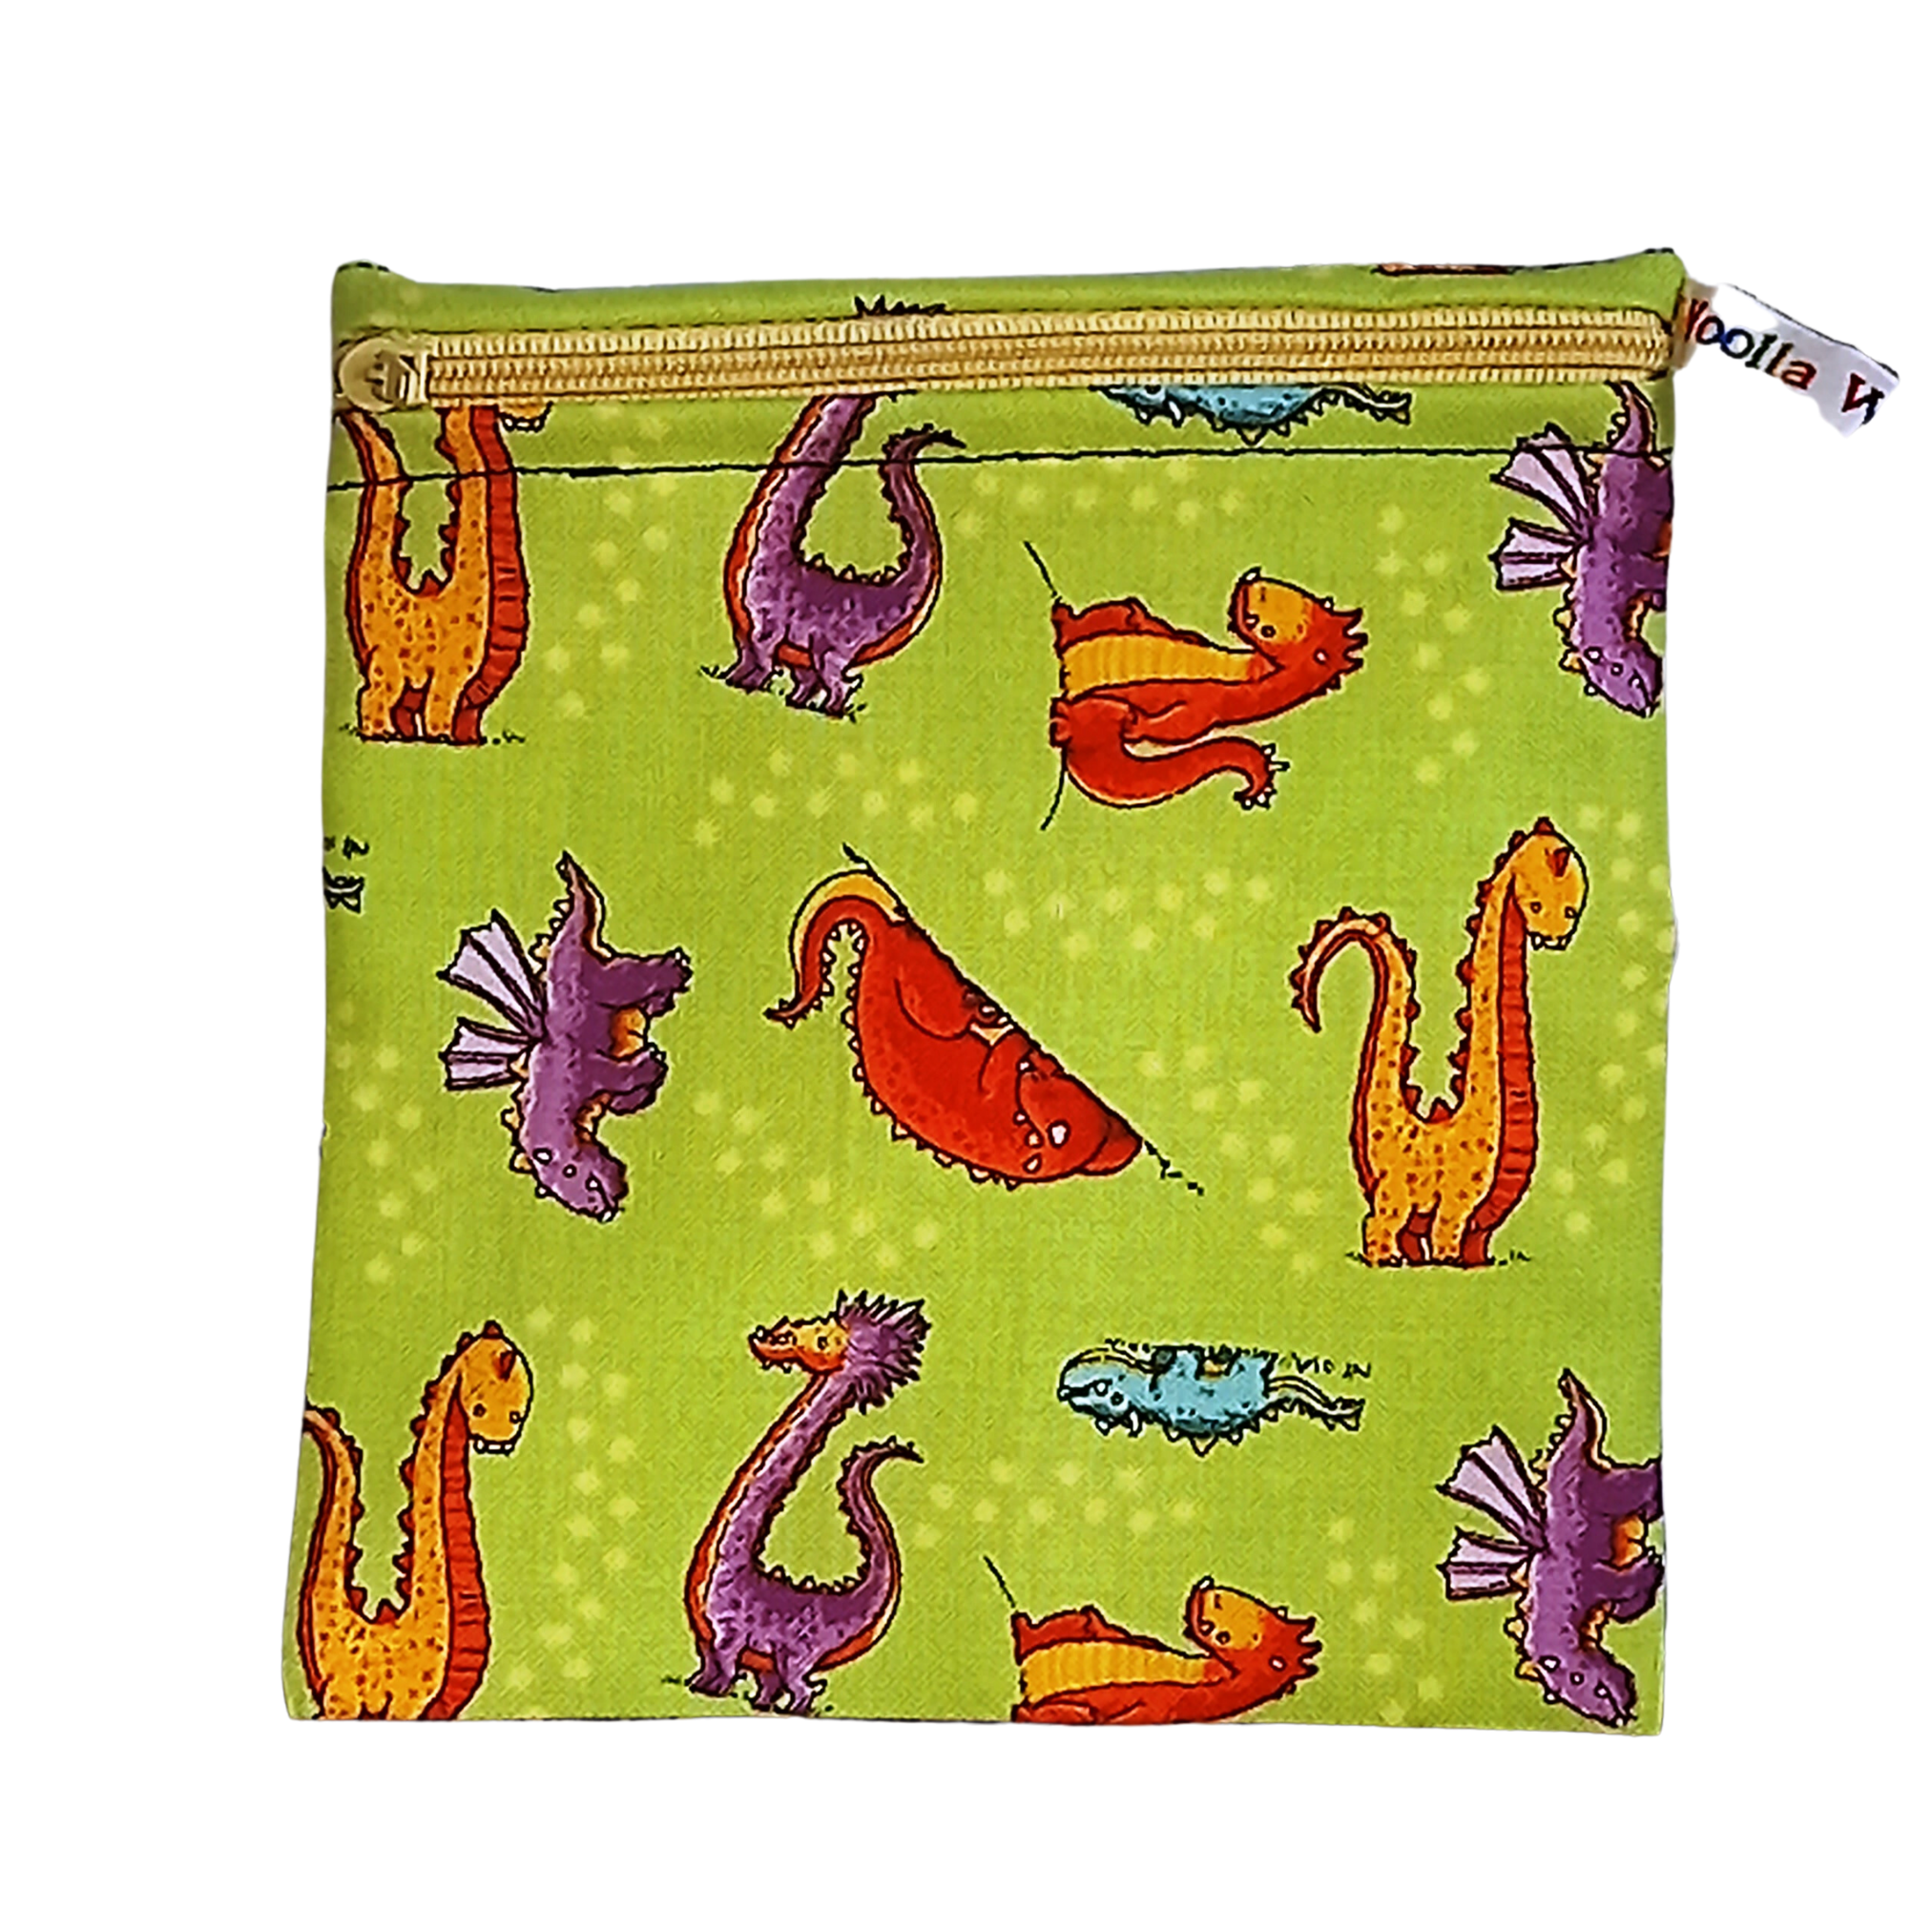 Cute Monsters - Small Poppins Pouch Washable Snack Bag